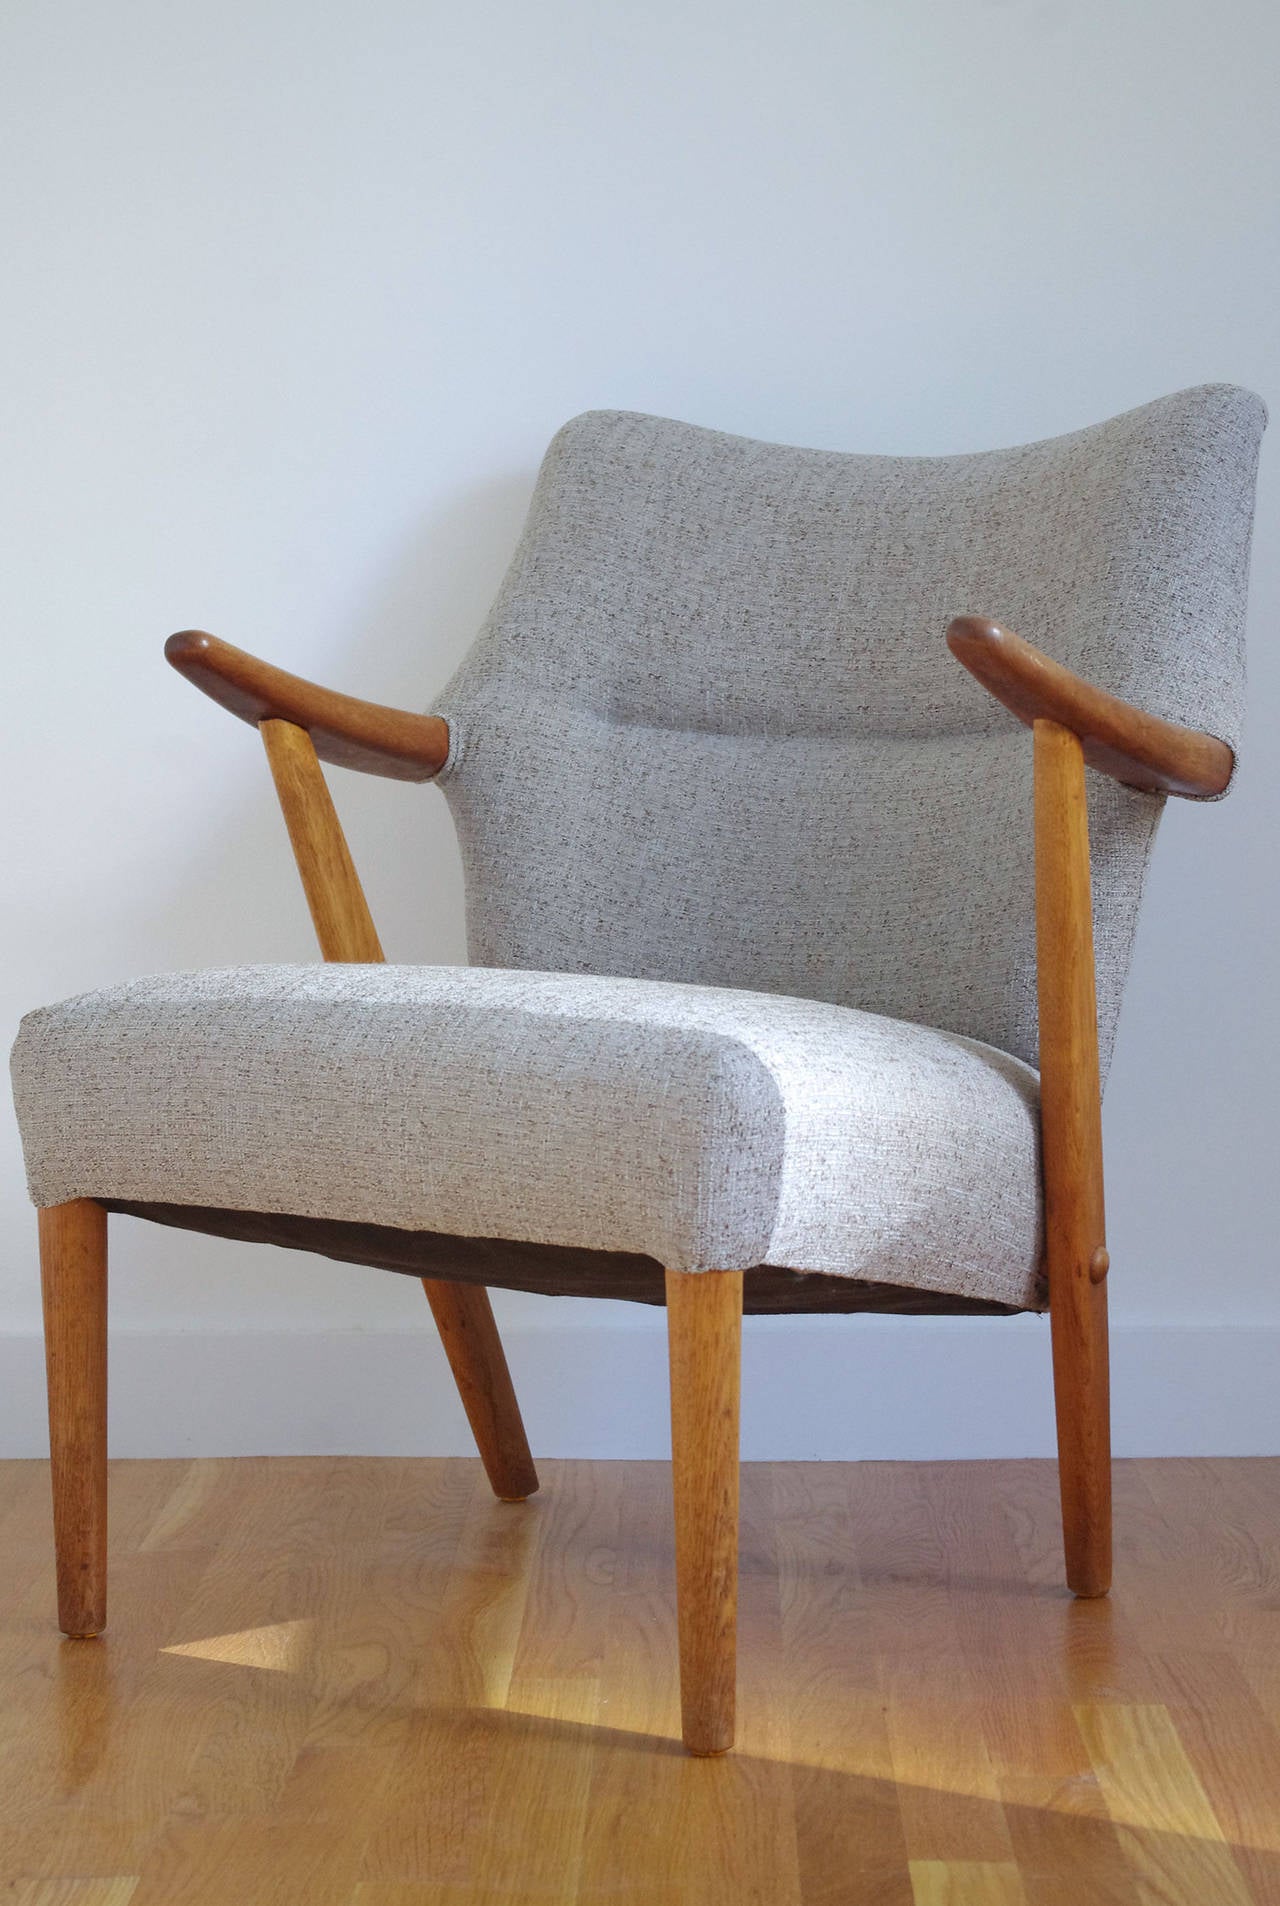 A pair of upholstered lounge chairs in the style of Aksel Bender Madsen possibly for Bovenkamp, circa 1950.

Featuring teak arms and oak legs. Recently upholstered in a gray tweed fabric.